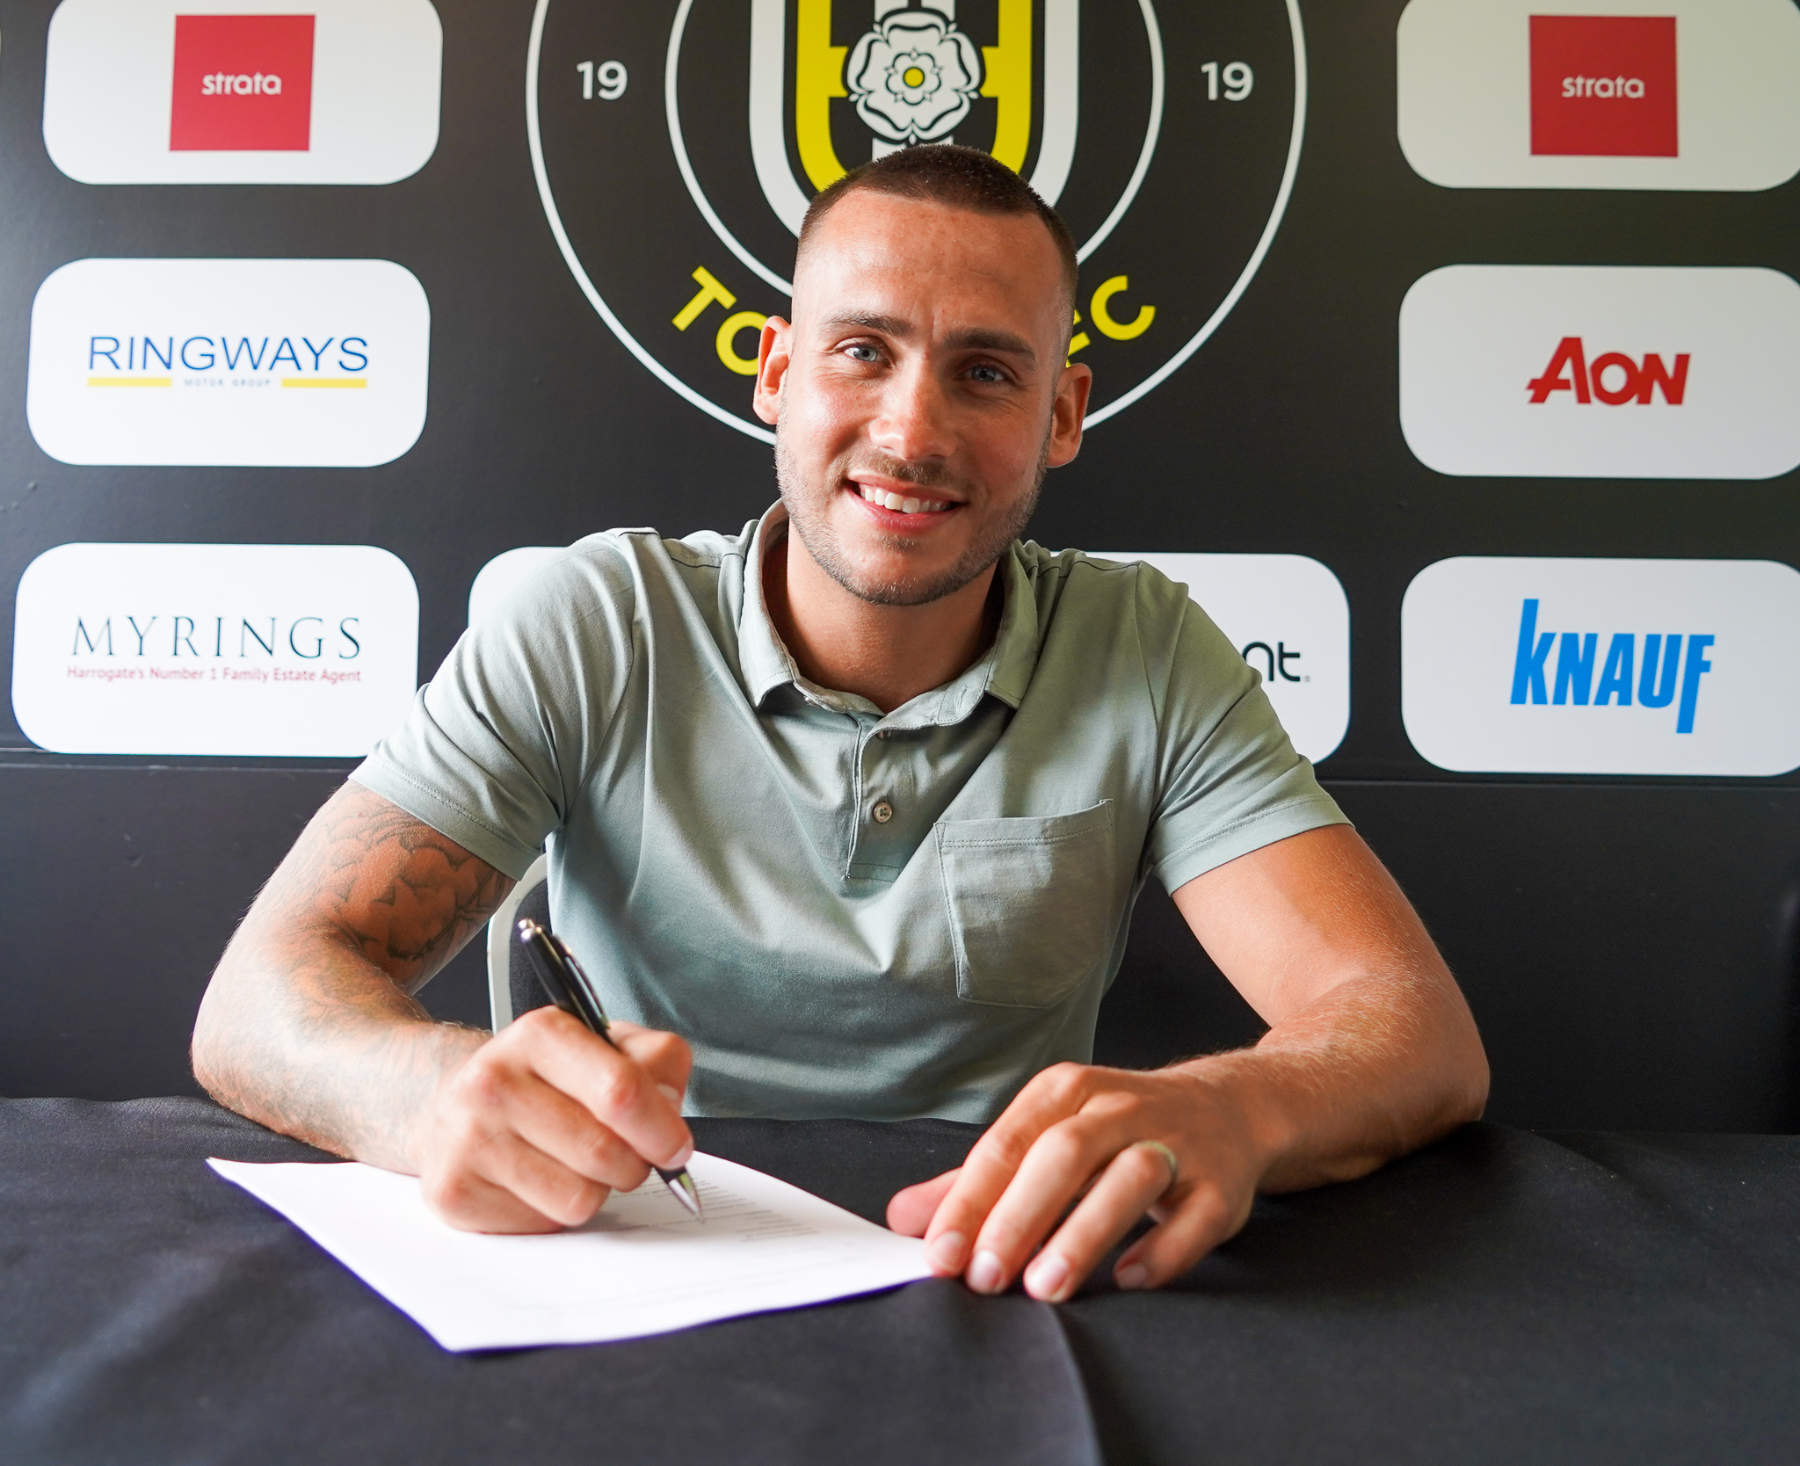 Harrogate Town AFC announce fourth signing of the summer, defender Joe Mattock